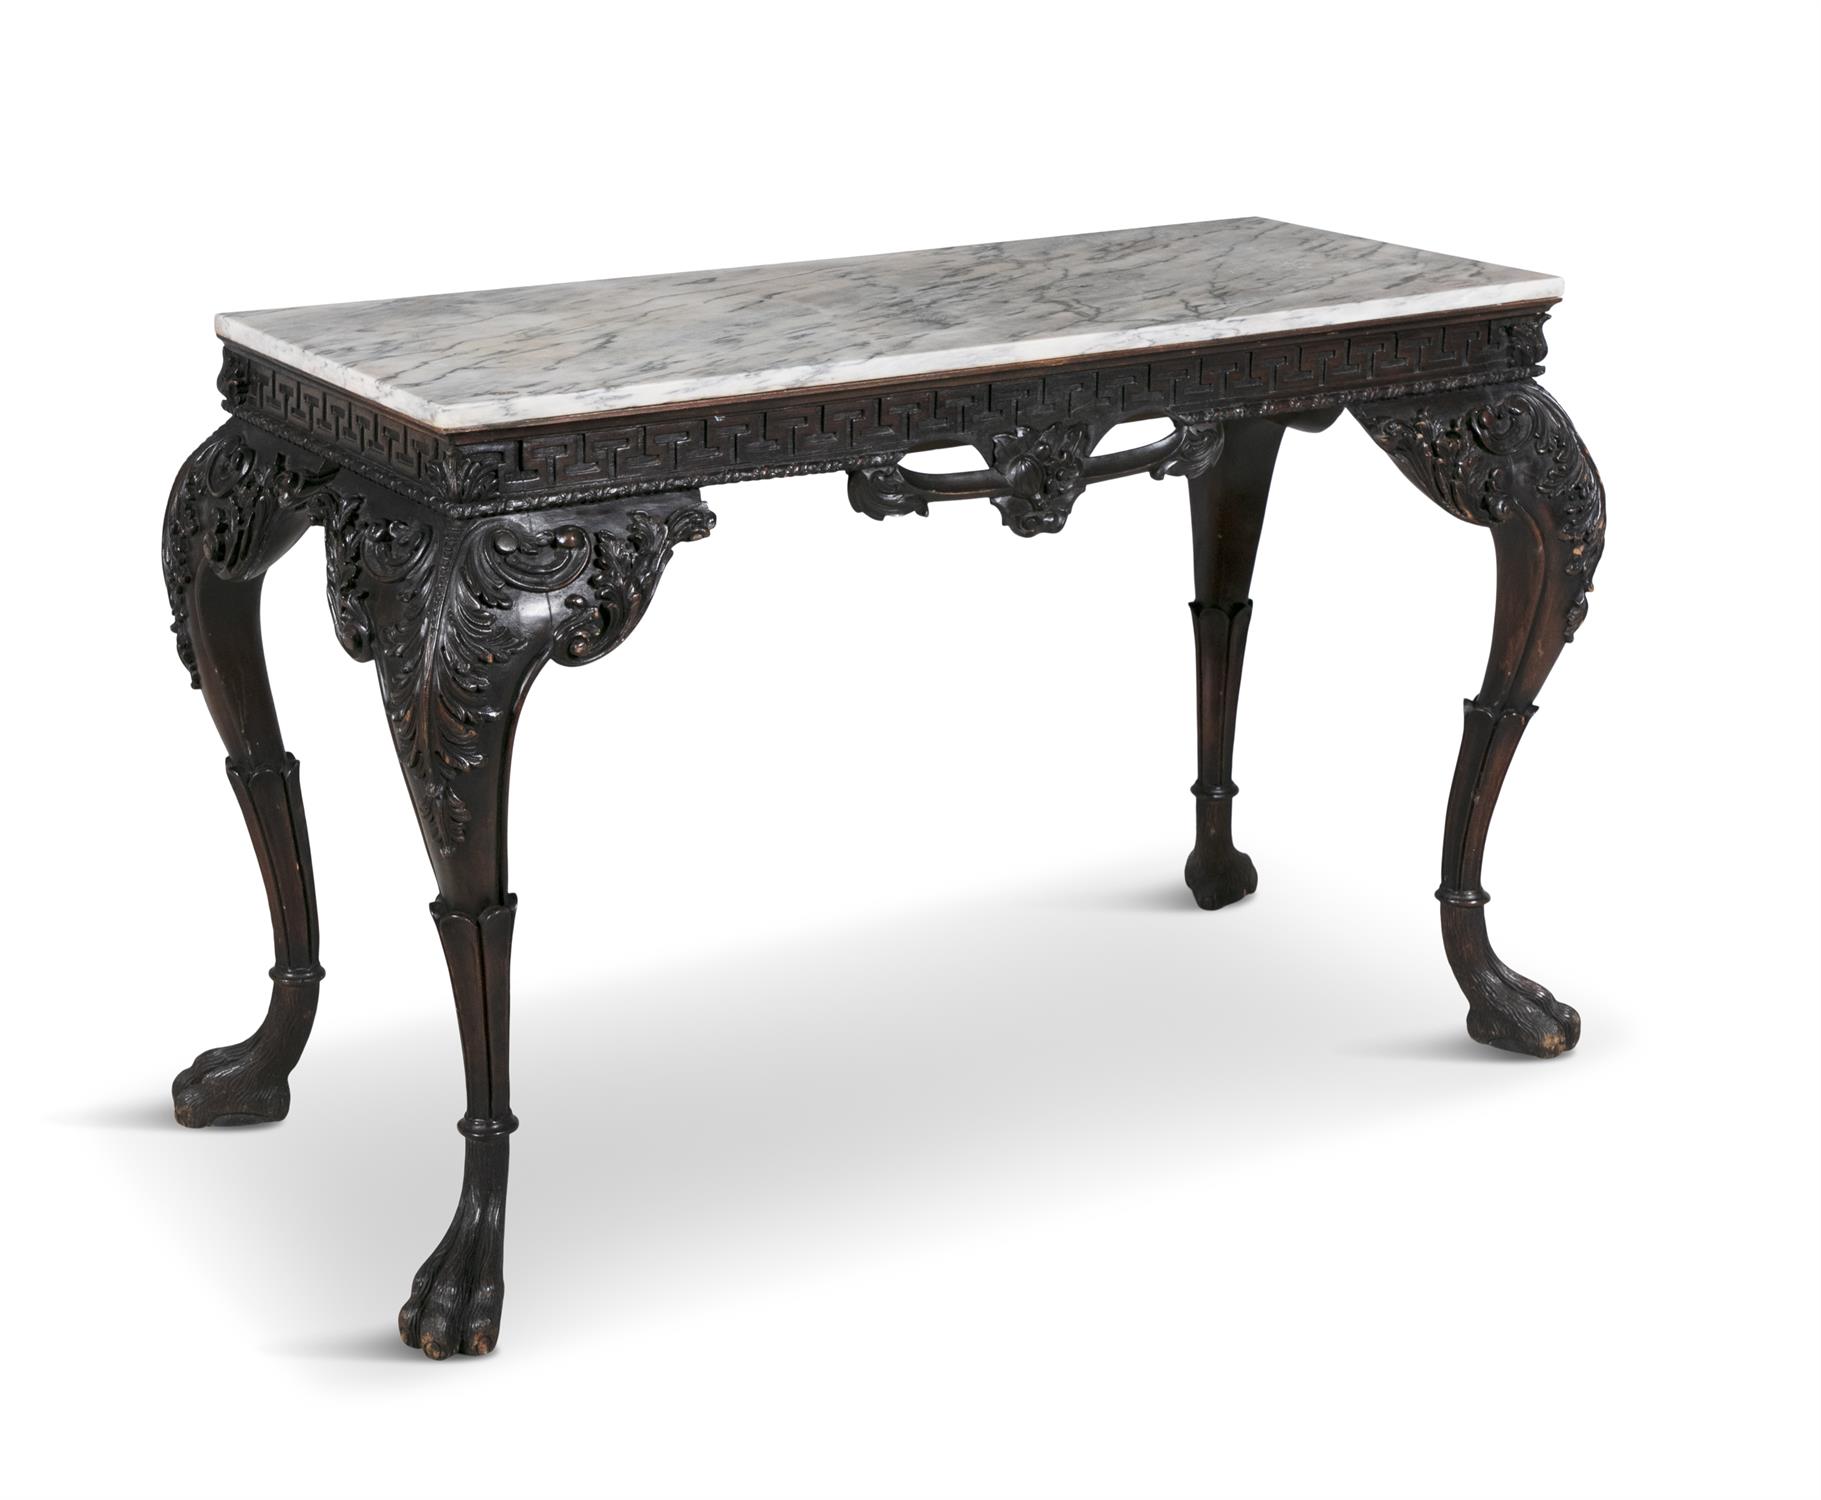 A GEORGE III STYLE SIDE TABLE, the rectangular white marble top above a geometric carved frieze, - Image 2 of 3